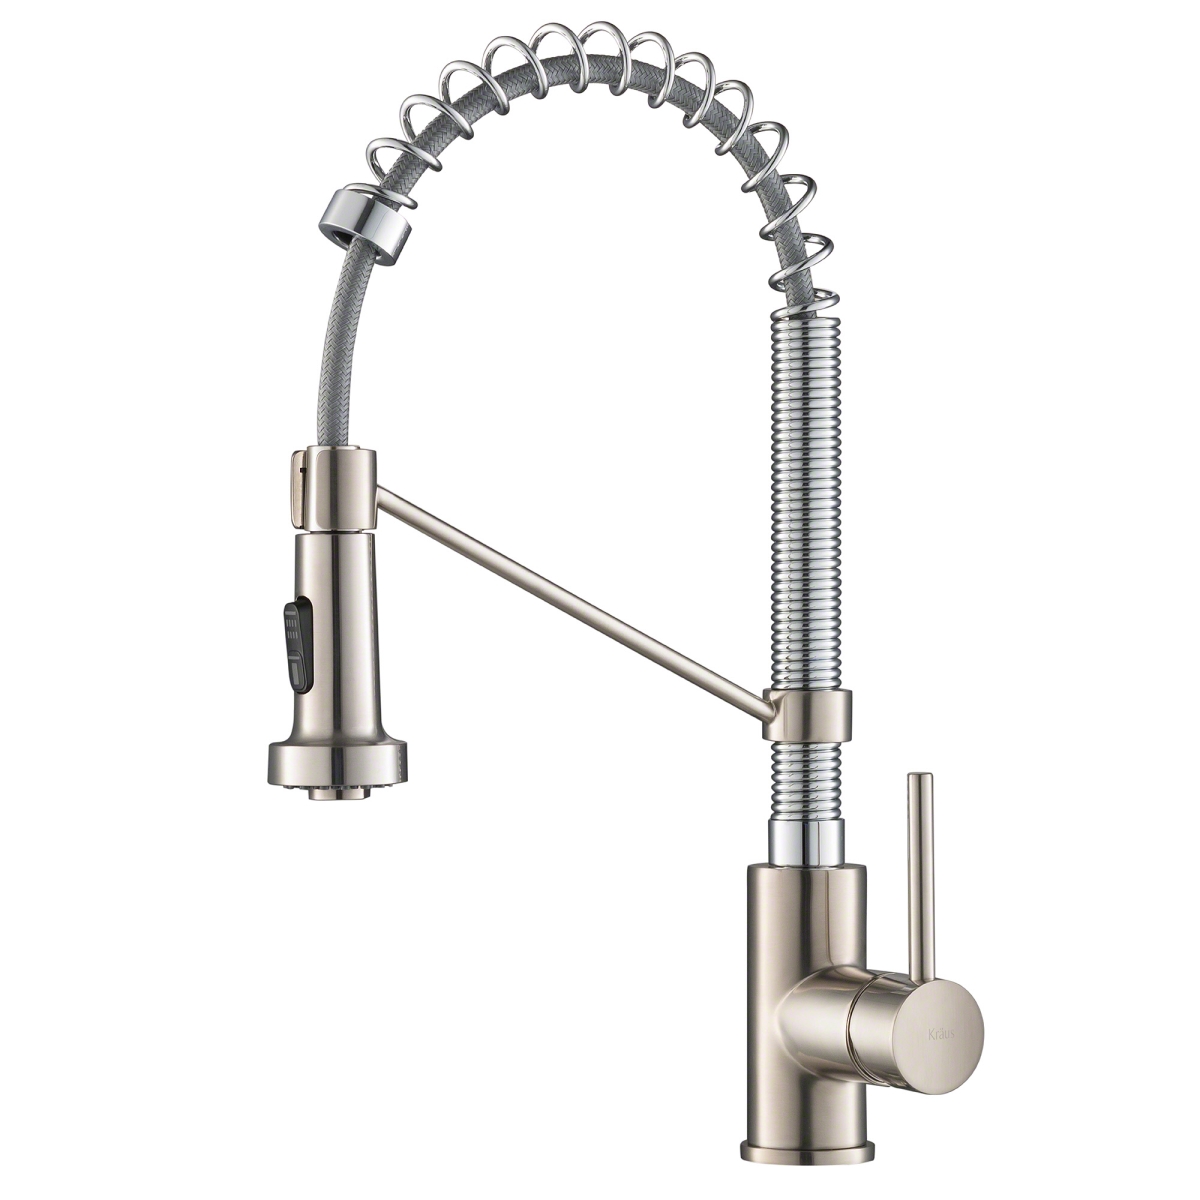 Kraus Kpf-1610ssch 18 In. Commercial Kitchen Faucet With Dual Function Pull Down Sprayhead In Stainless Steel, Chrome